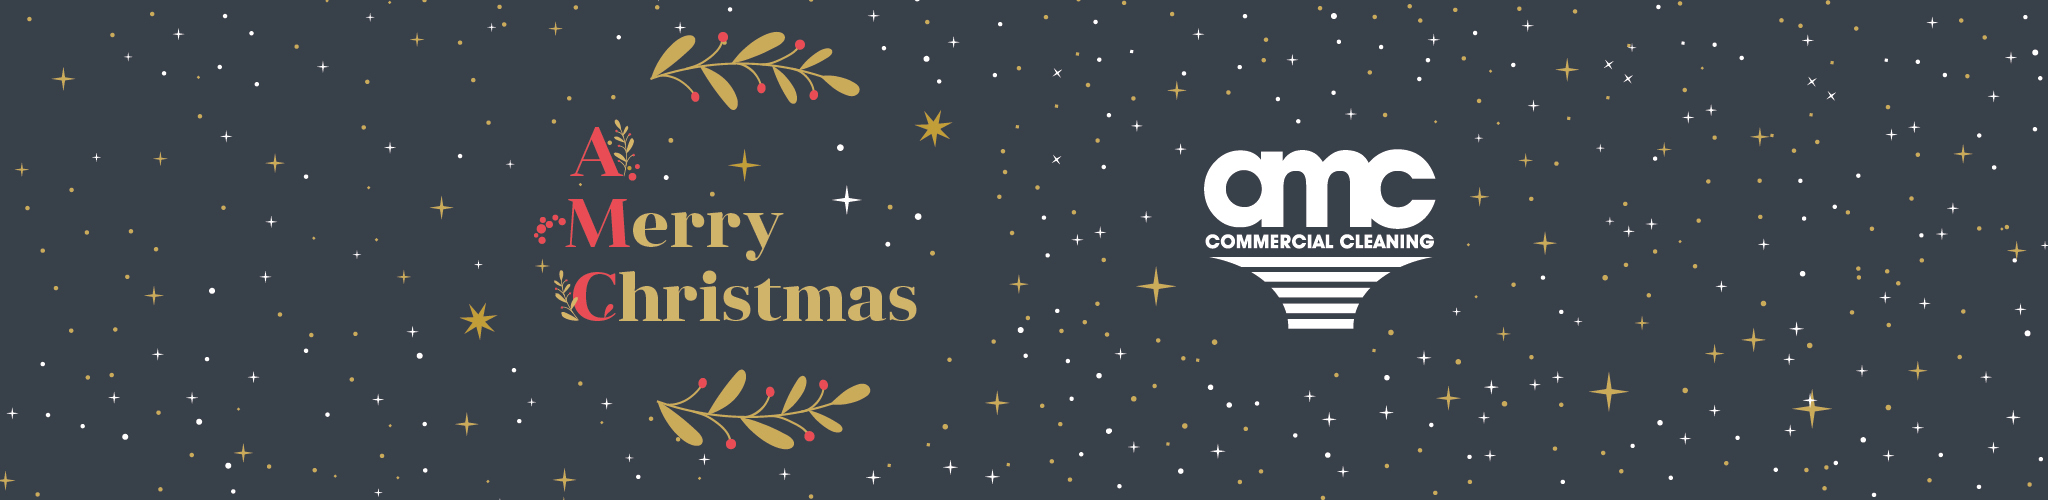 Merry Christmas from AMC Commercial Cleaning